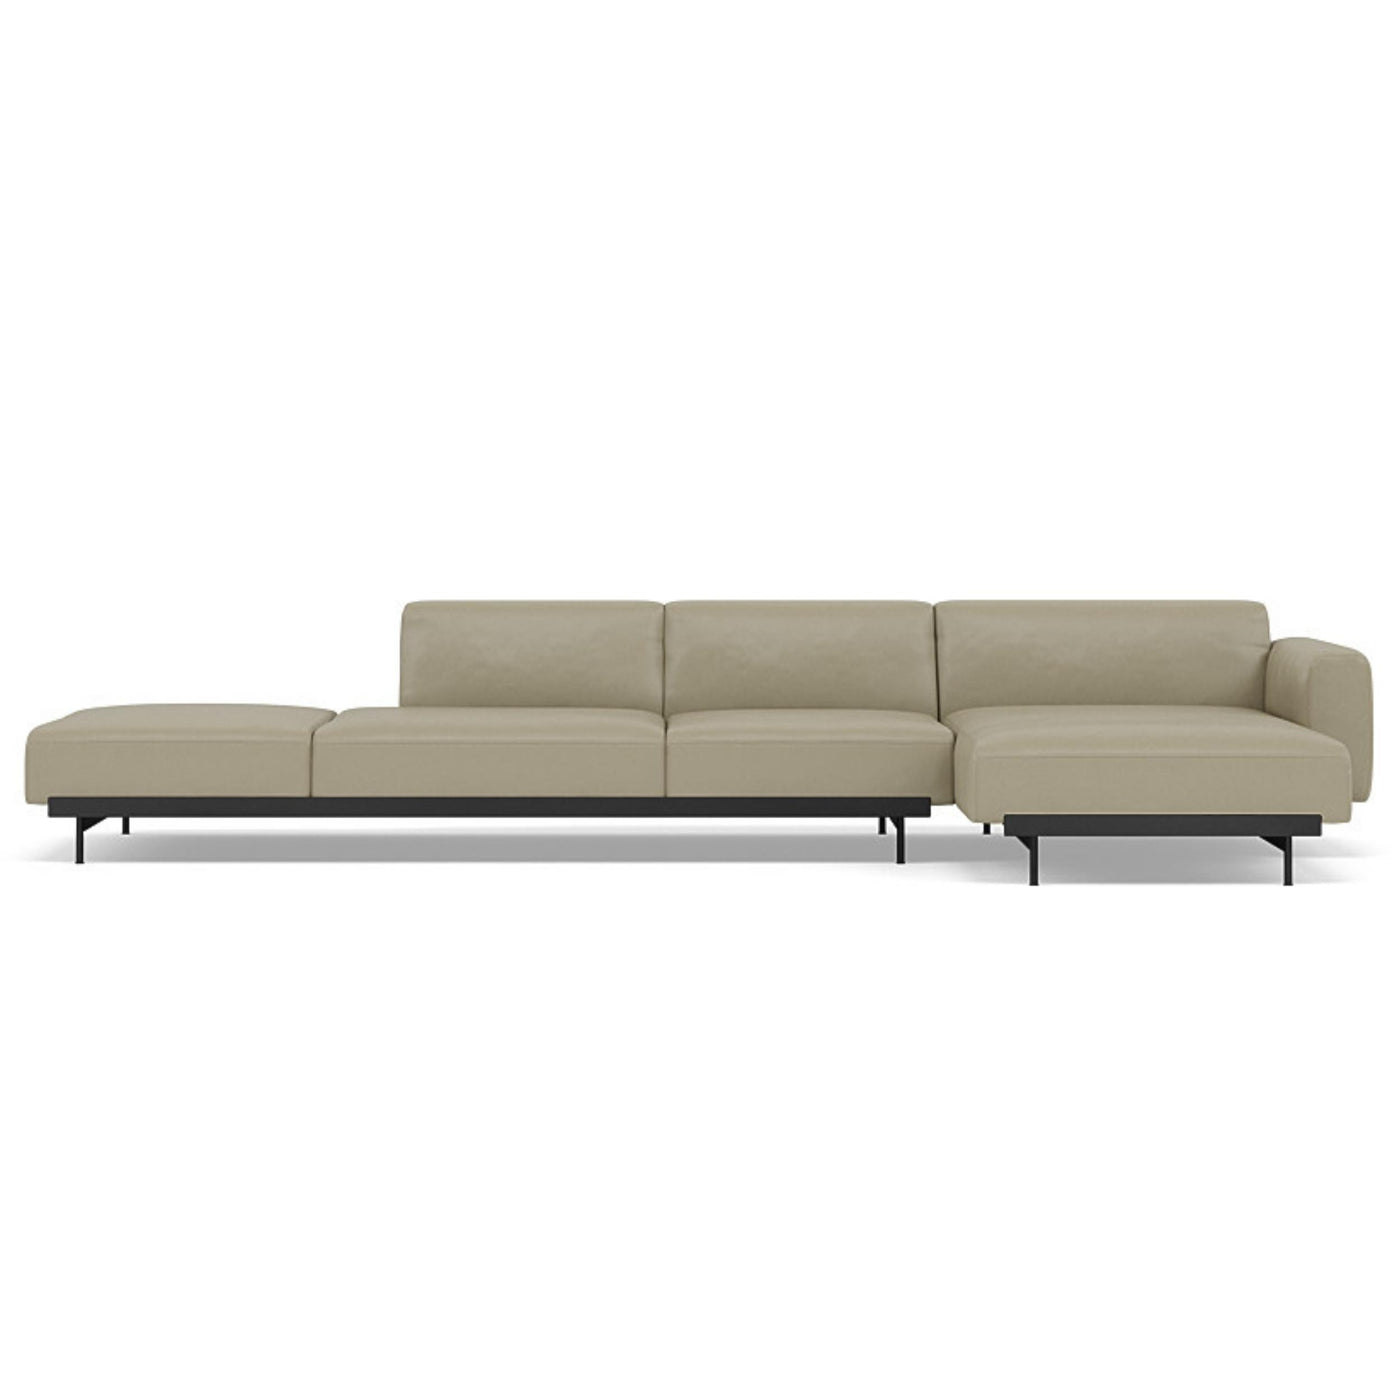 Muuto In Situ Modular 4 Seater Sofa configuration 4. Made to order from someday designs. #colour_stone-refine-leather